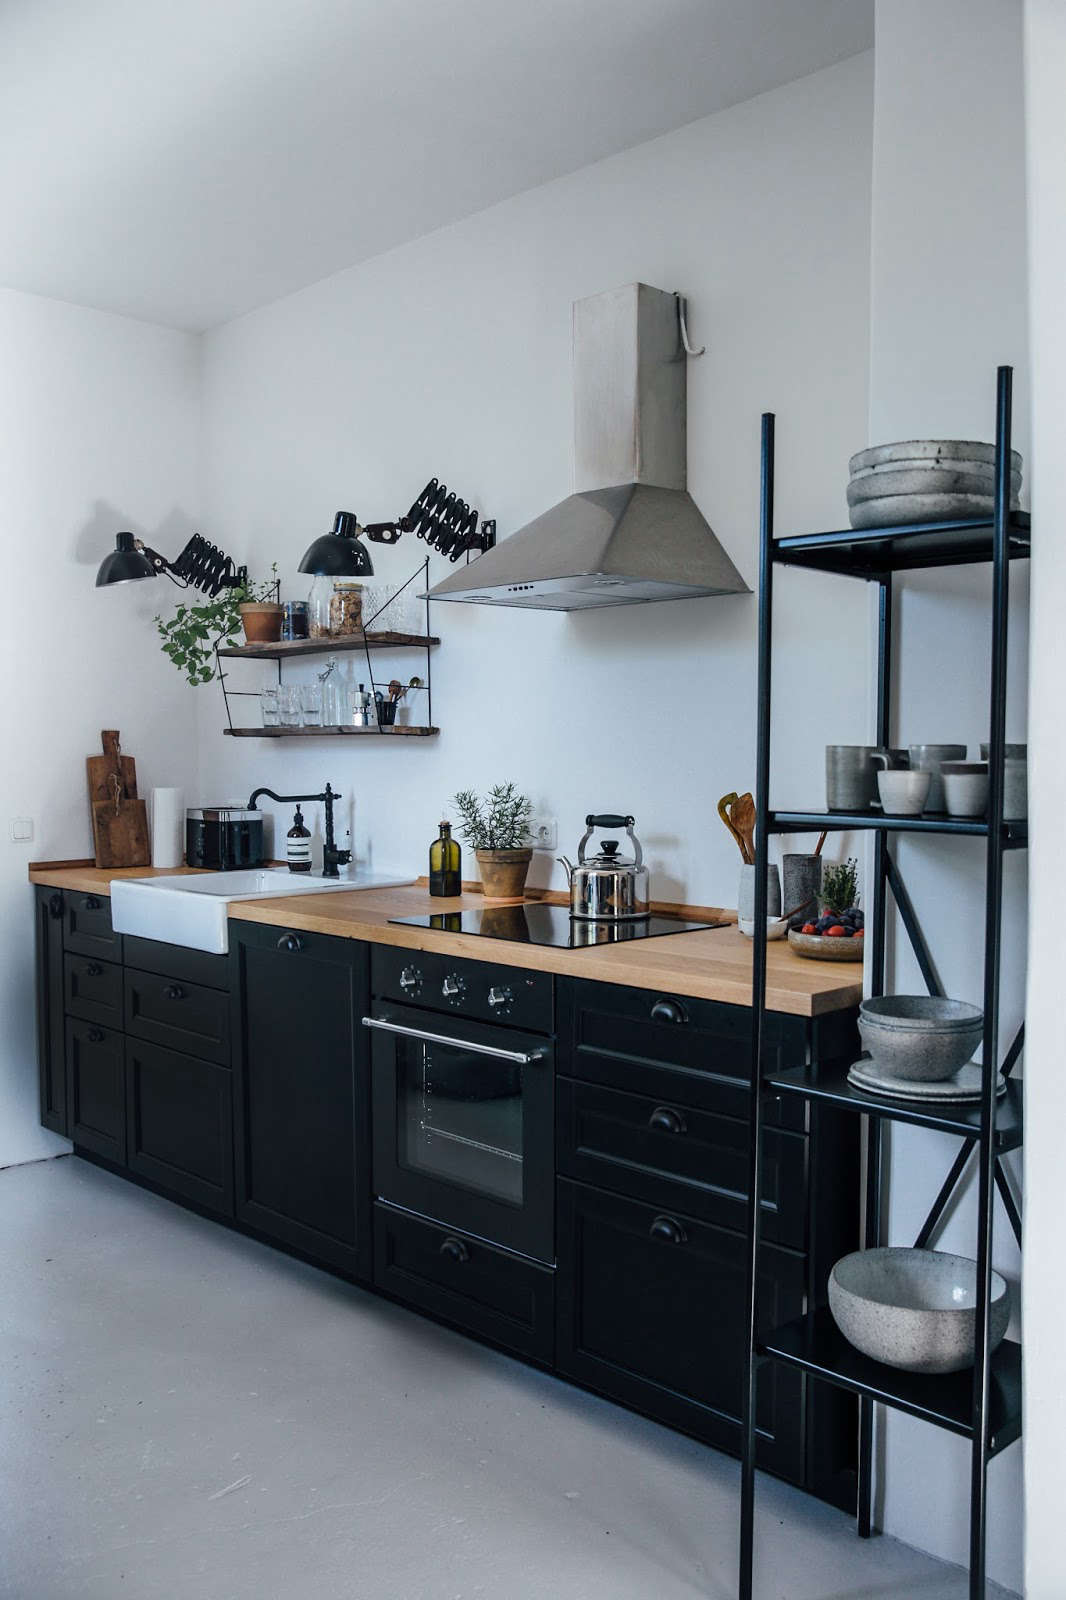 Kitchen of the Week A DIY Ikea Country Kitchen for Two Berlin ...